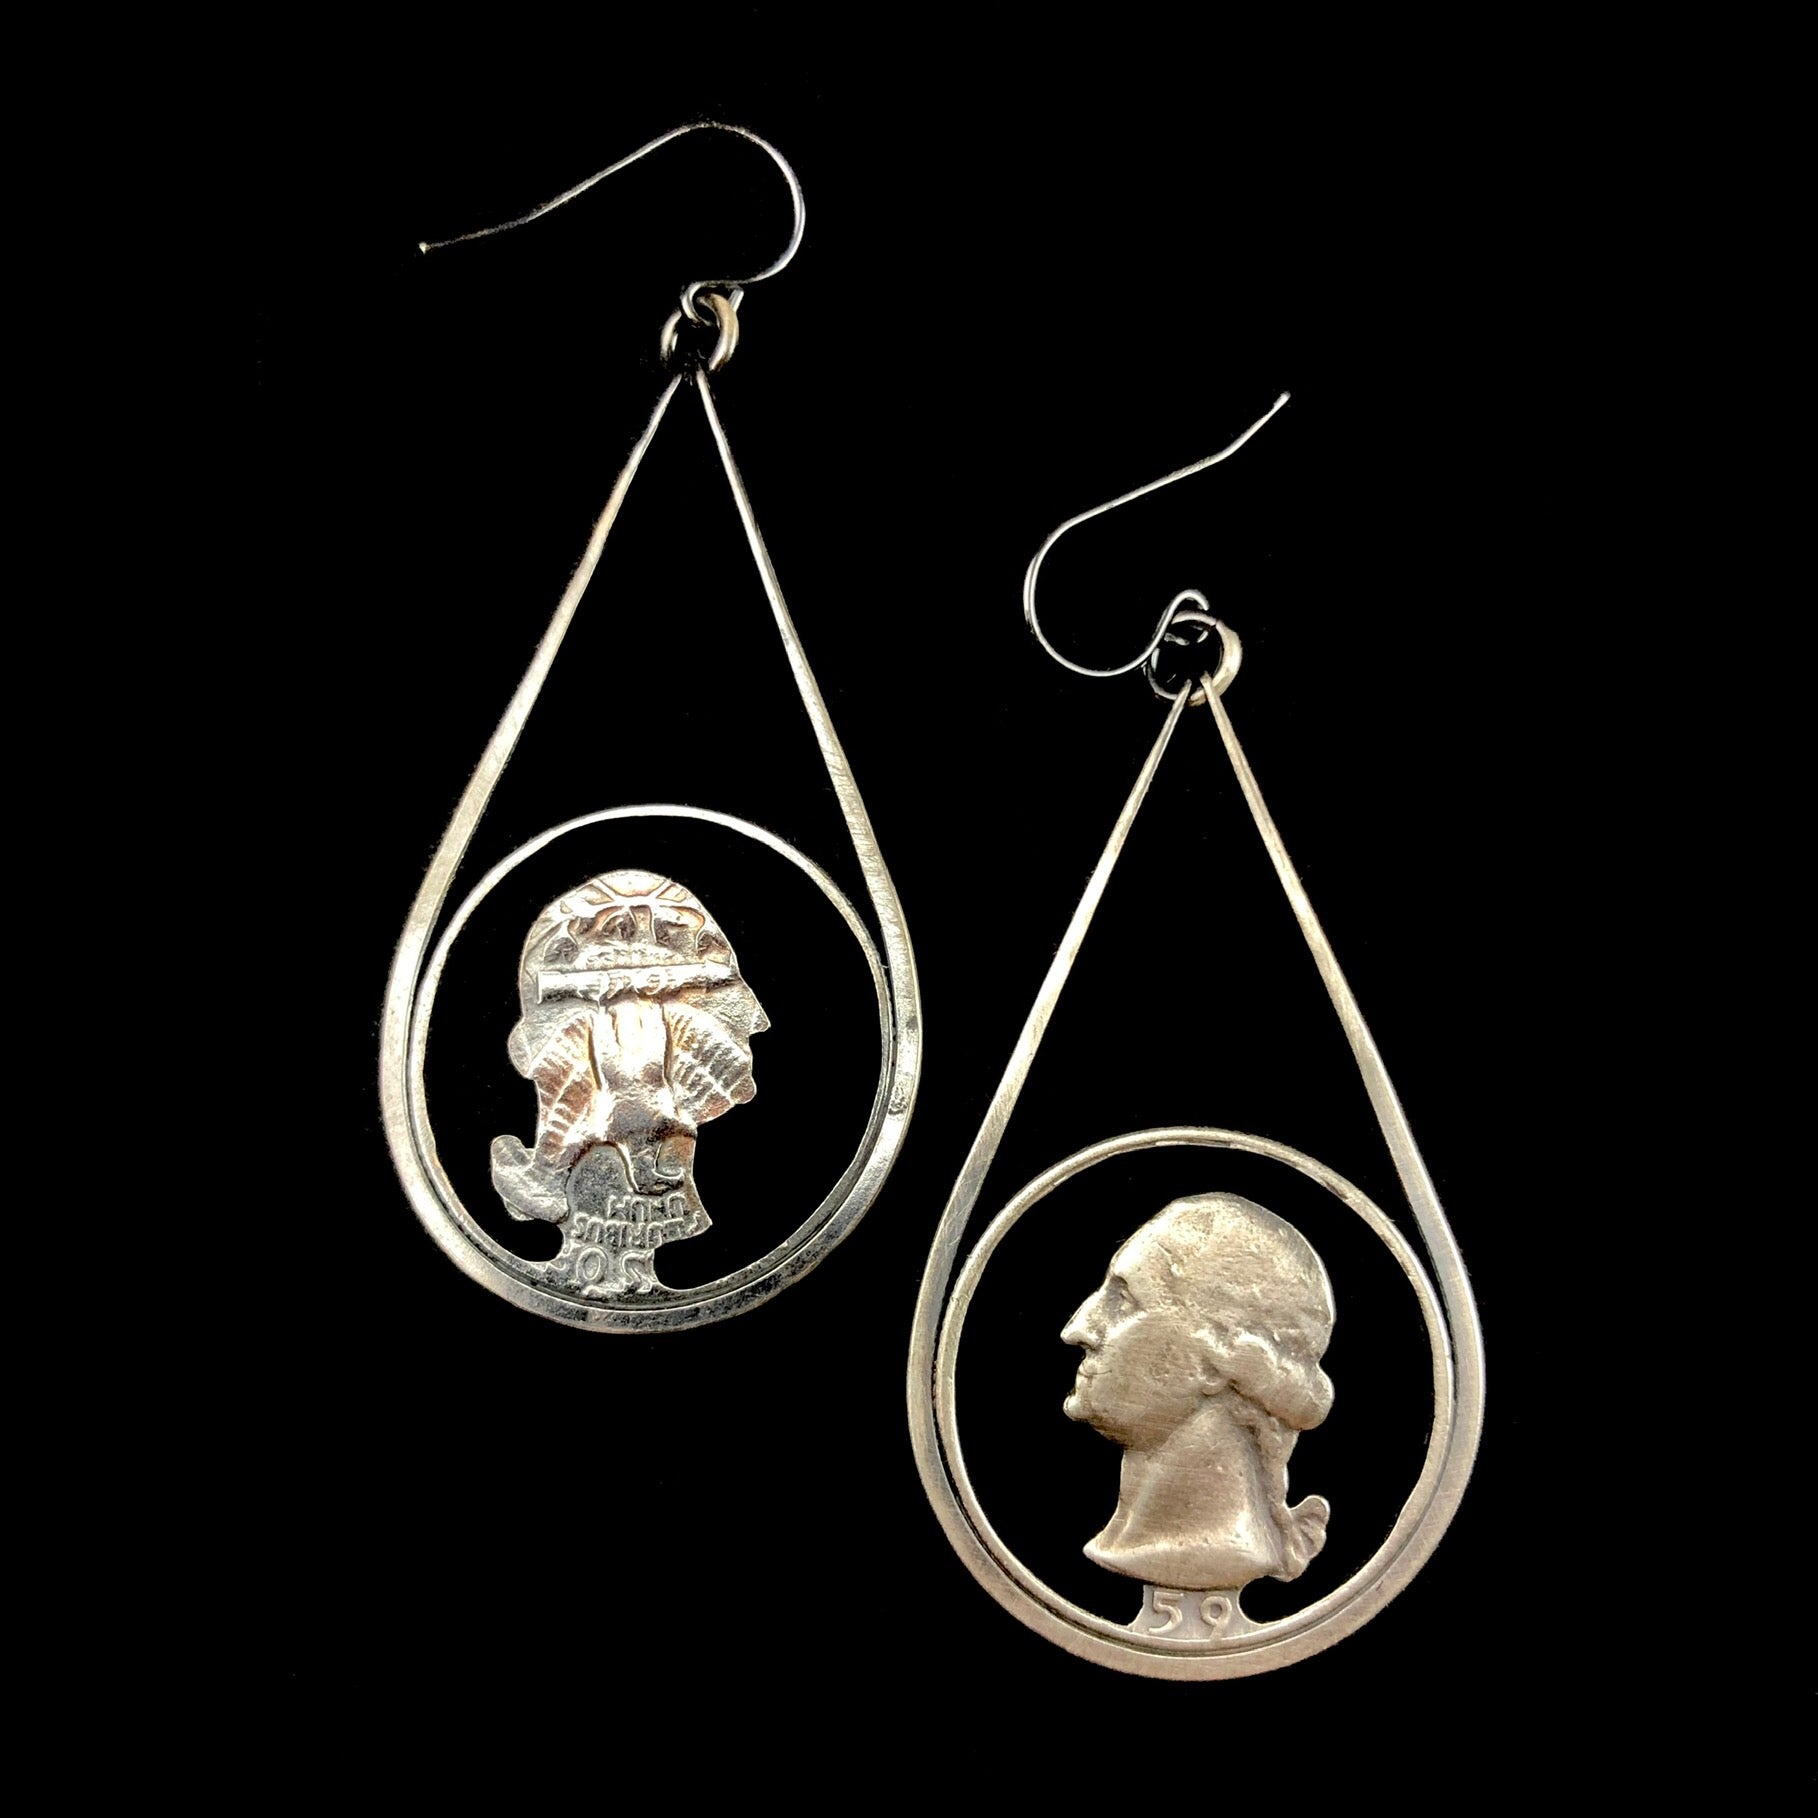 Back and Front views of Quarter Coin Earrings